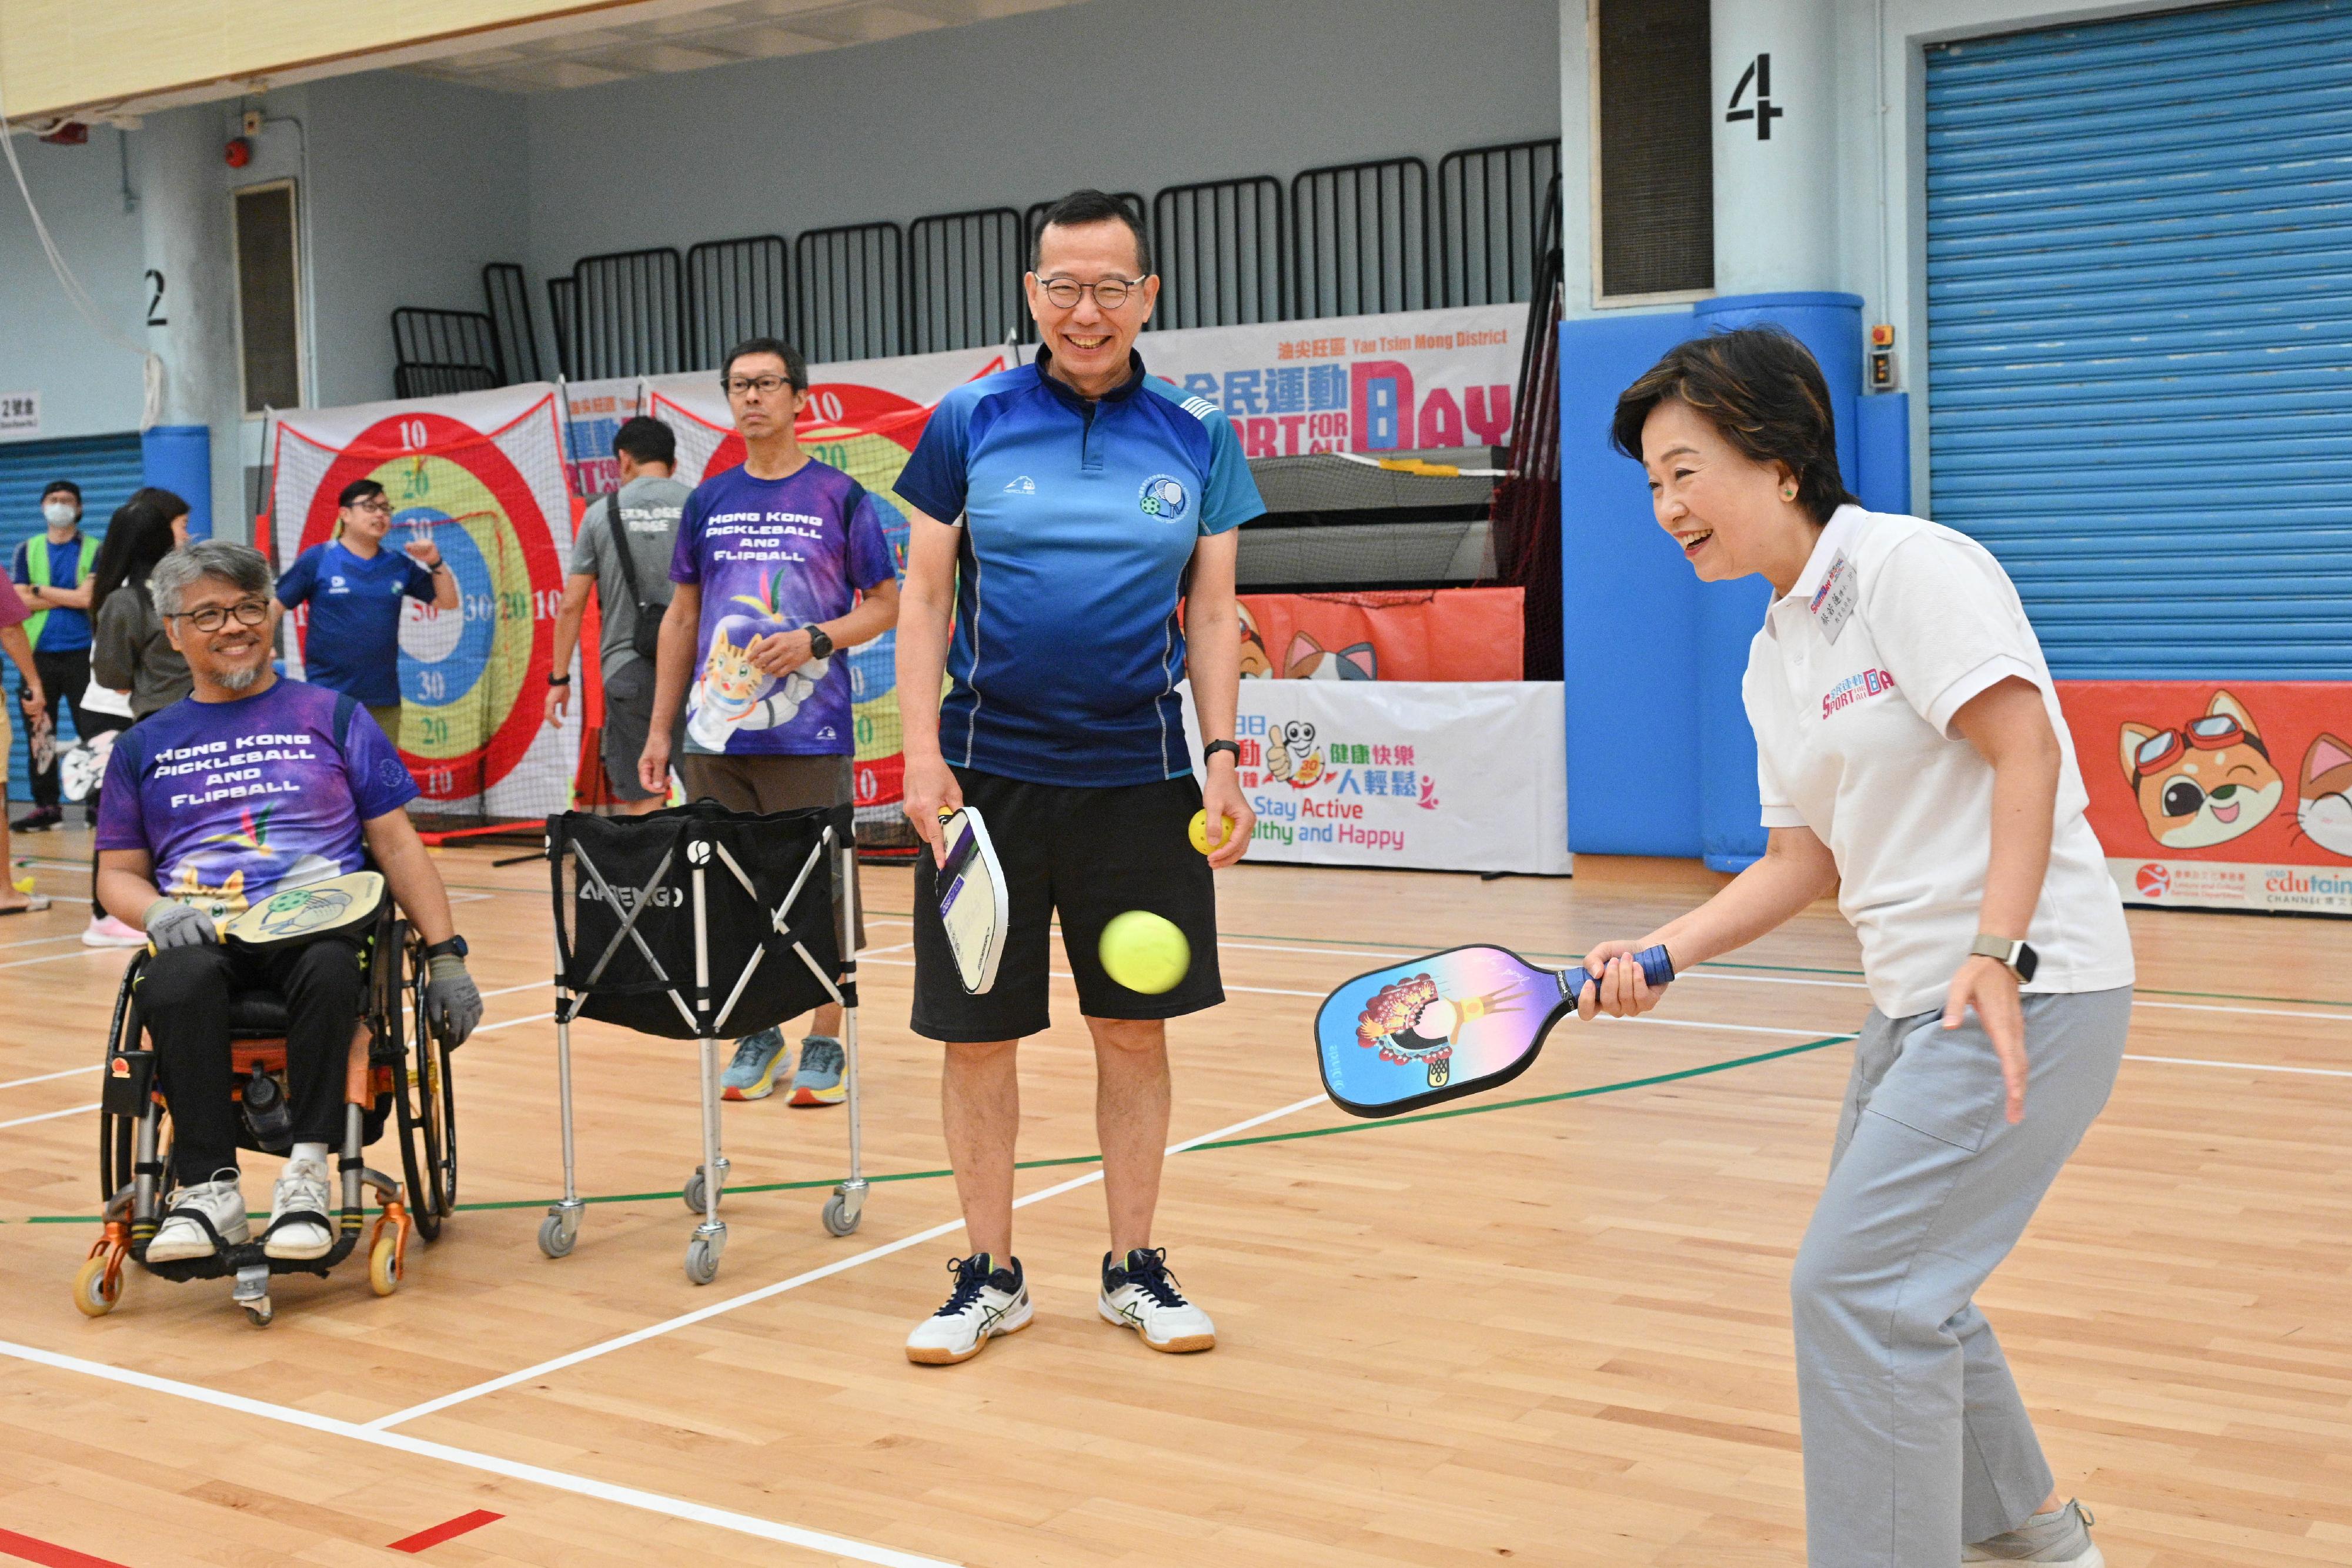 The Secretary for Education, Dr Choi Yuk-lin, participated in the Sport For All Day 2023 activities organised by the Leisure and Cultural Services Department at Kowloon Park Sports Centre today (August 6). Photo shows Dr Choi (first right) joining a session of pickleball with the public.